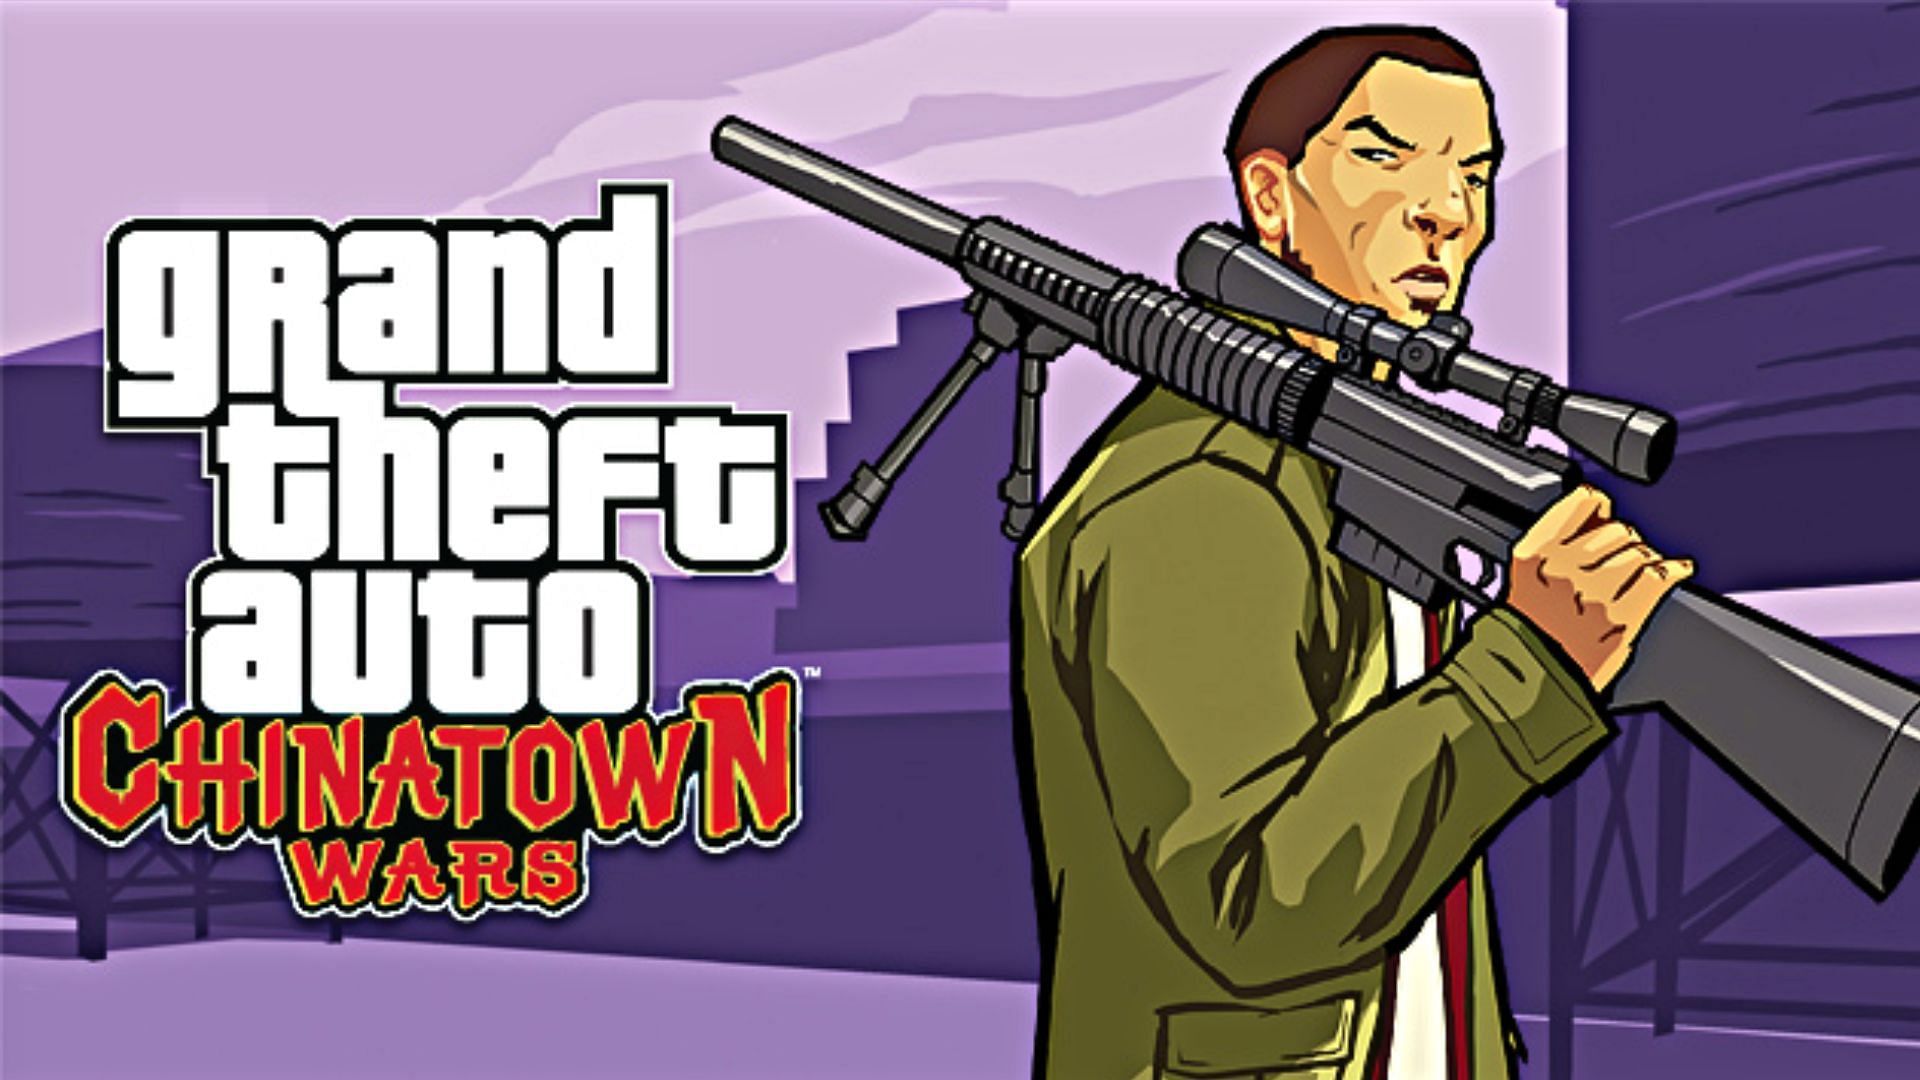 GTA Chinatown Wars featured was released in 2009 (Image via Rockstar Games)